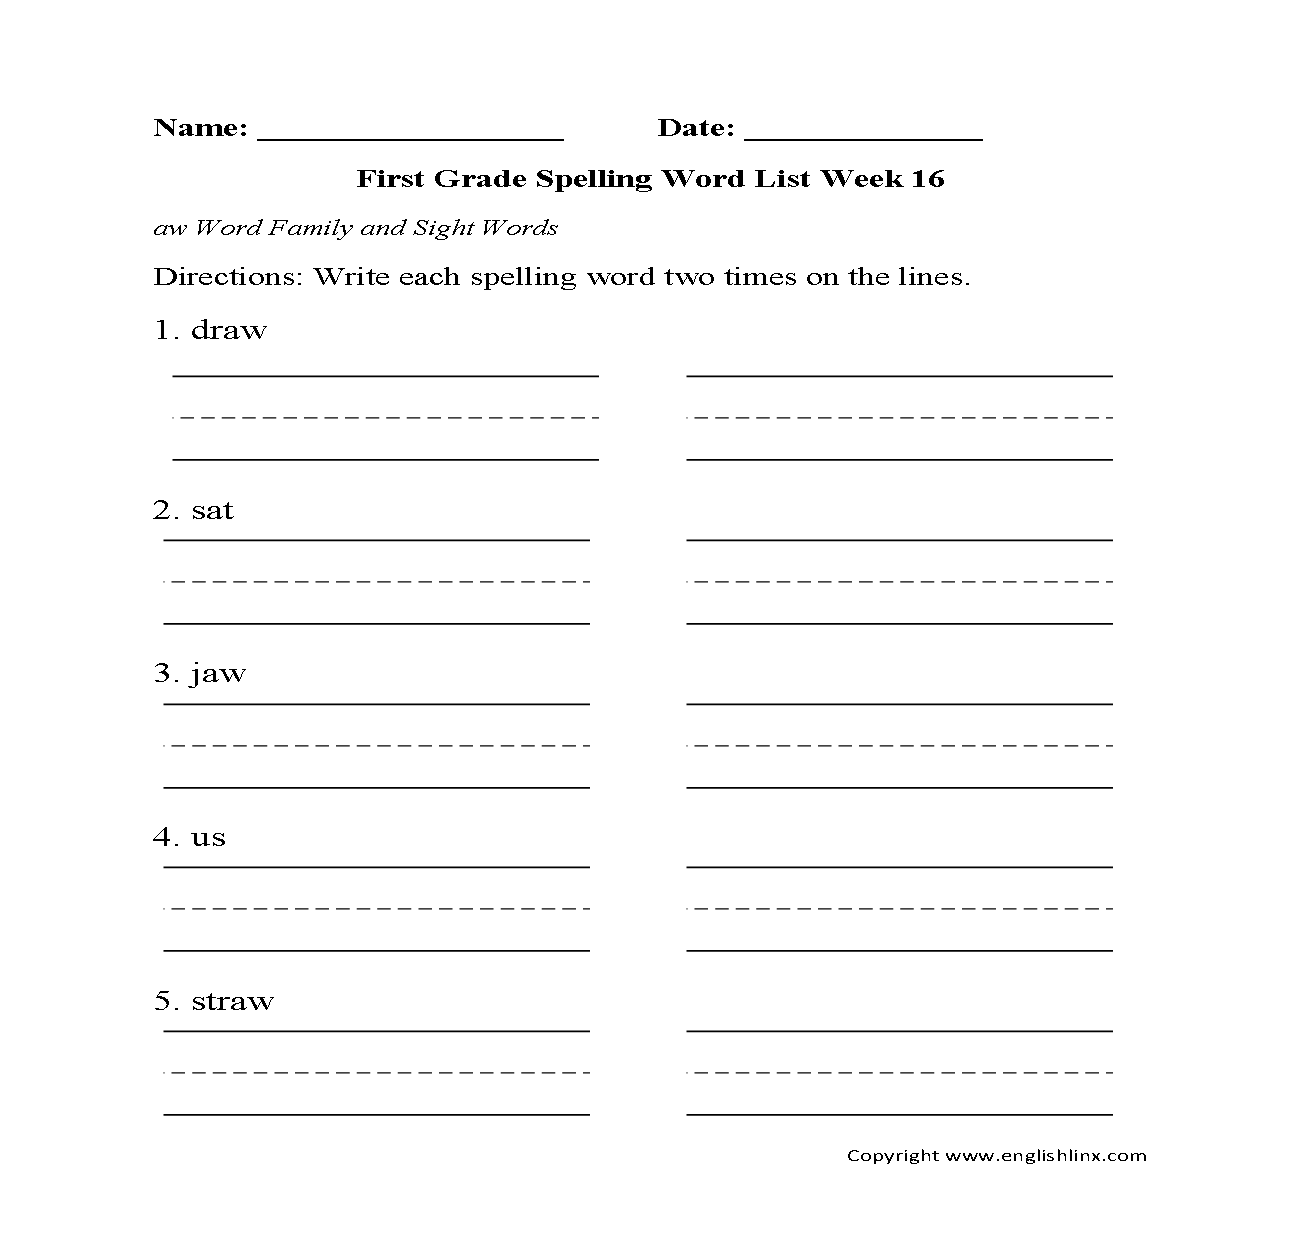 Week 16 aw family First Grade Spelling Words Worksheets